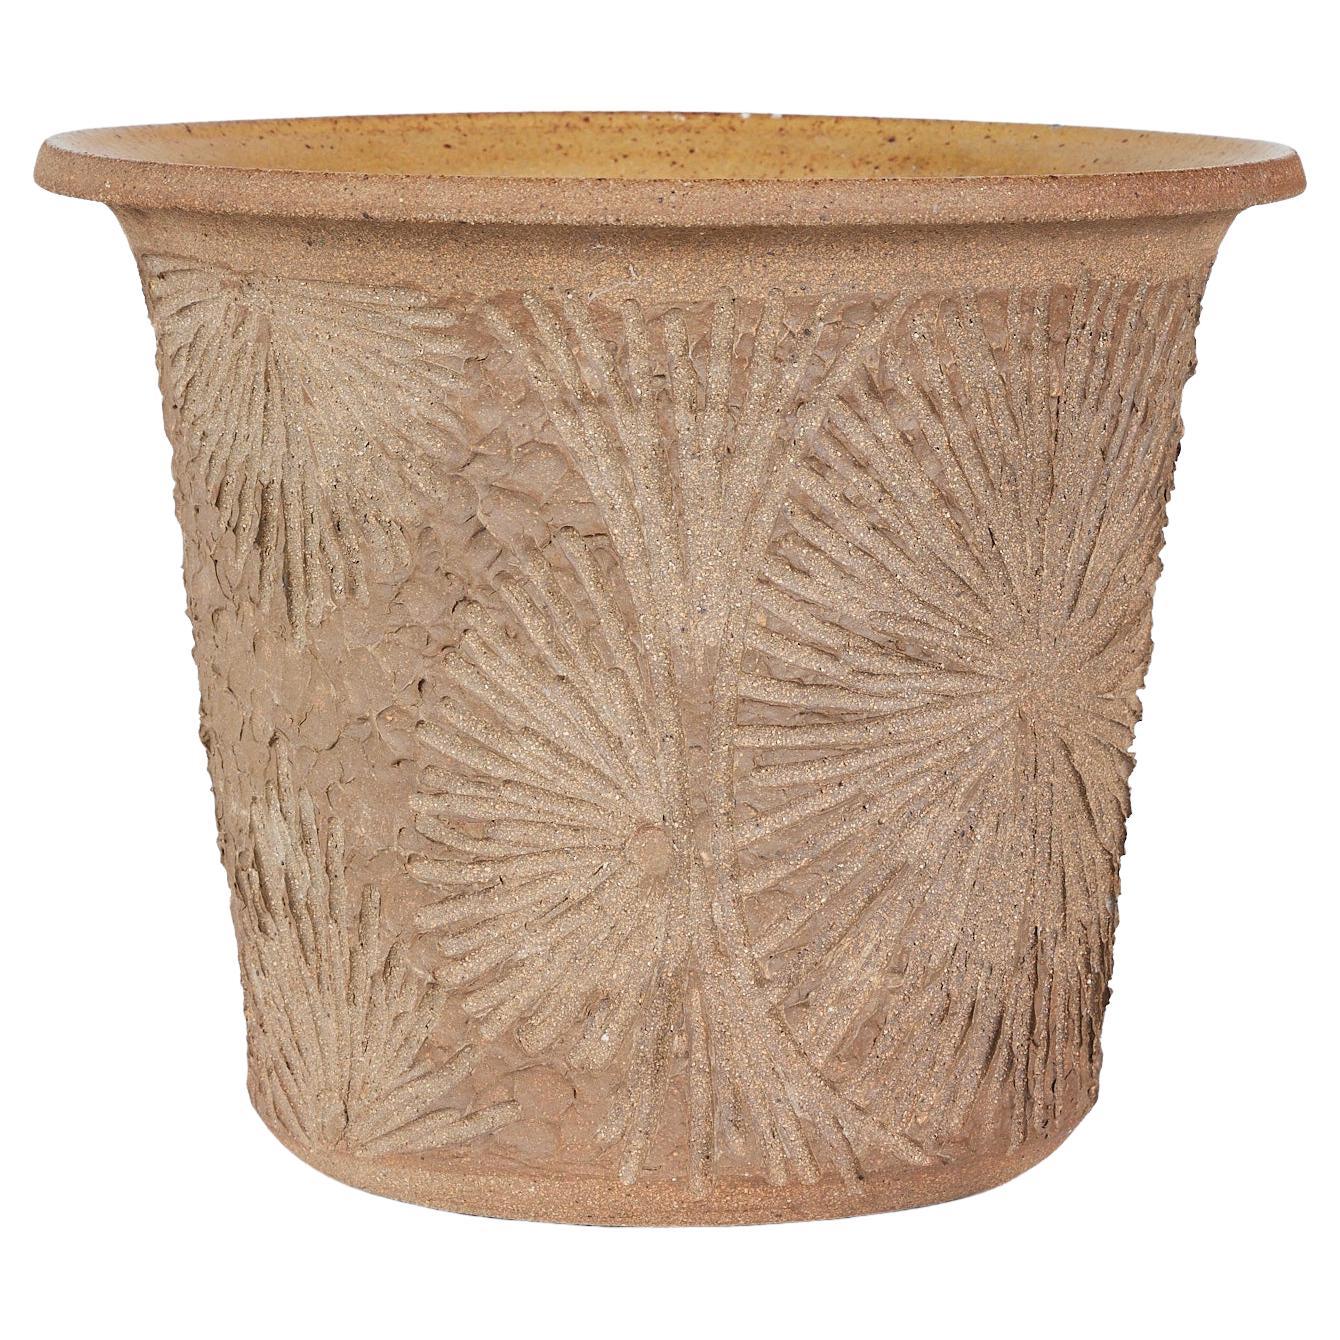 Robert Maxwell Incised Studio Pottery Planter with Flared Lip